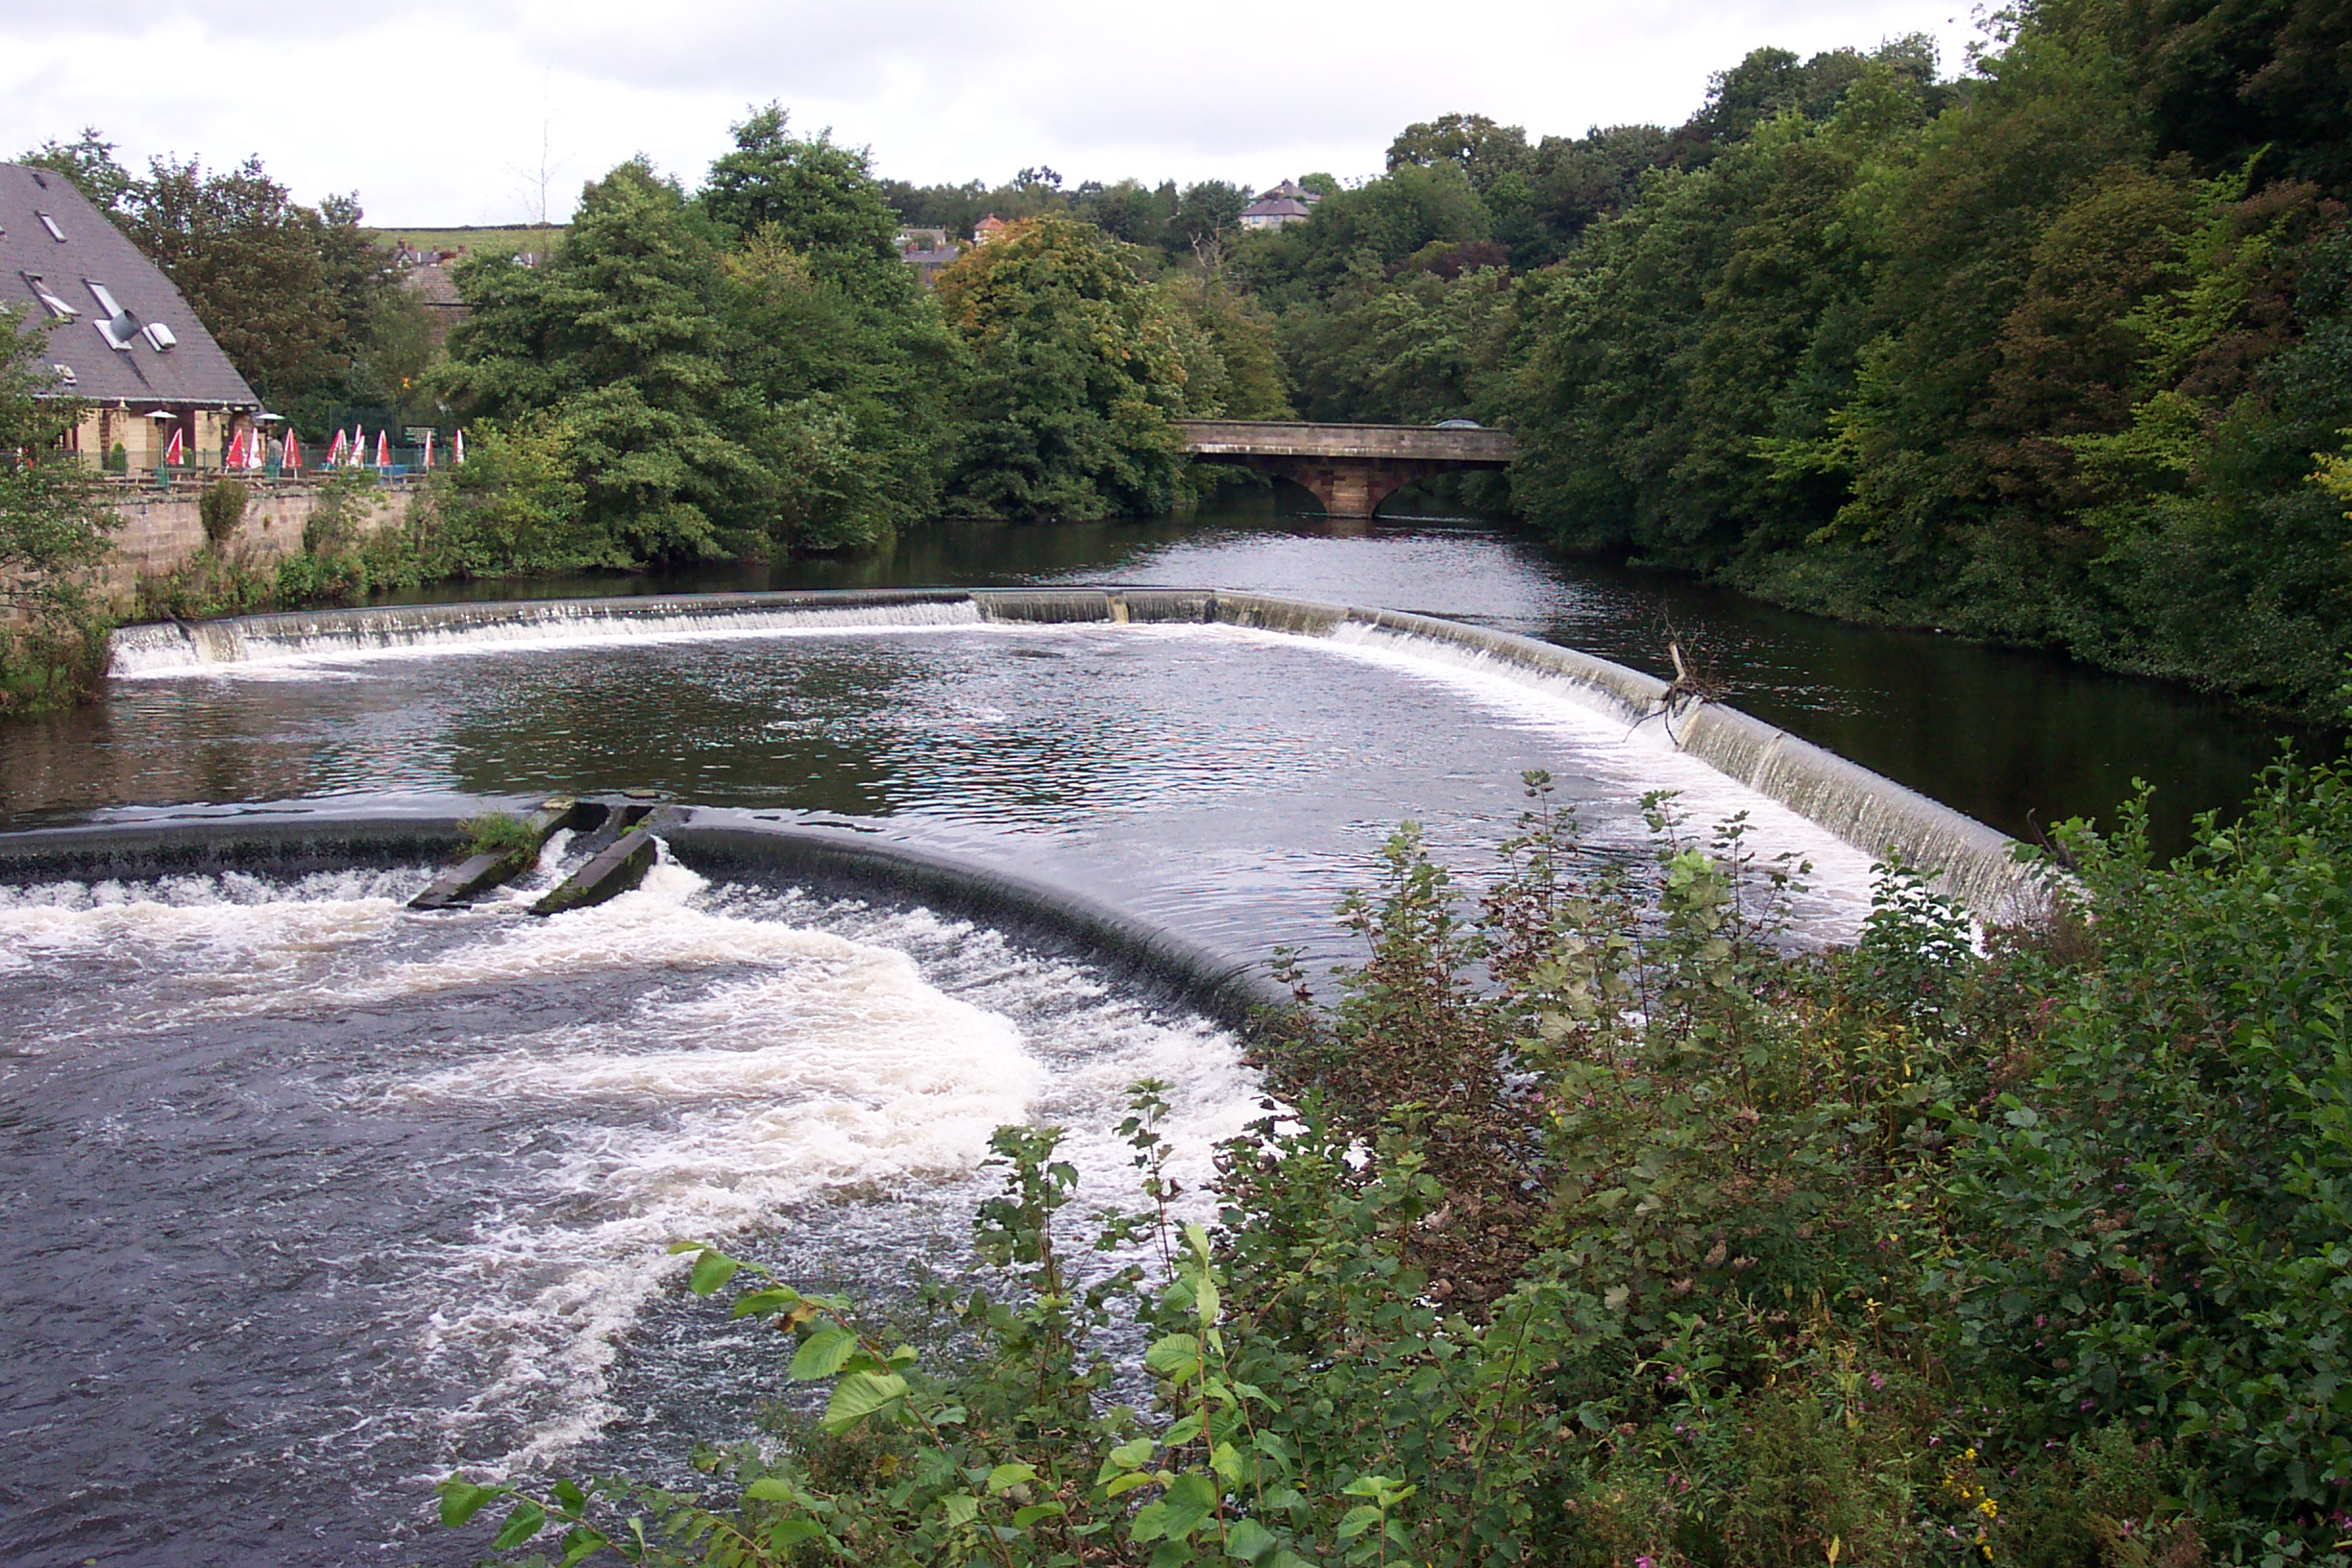 The Weir at Milford